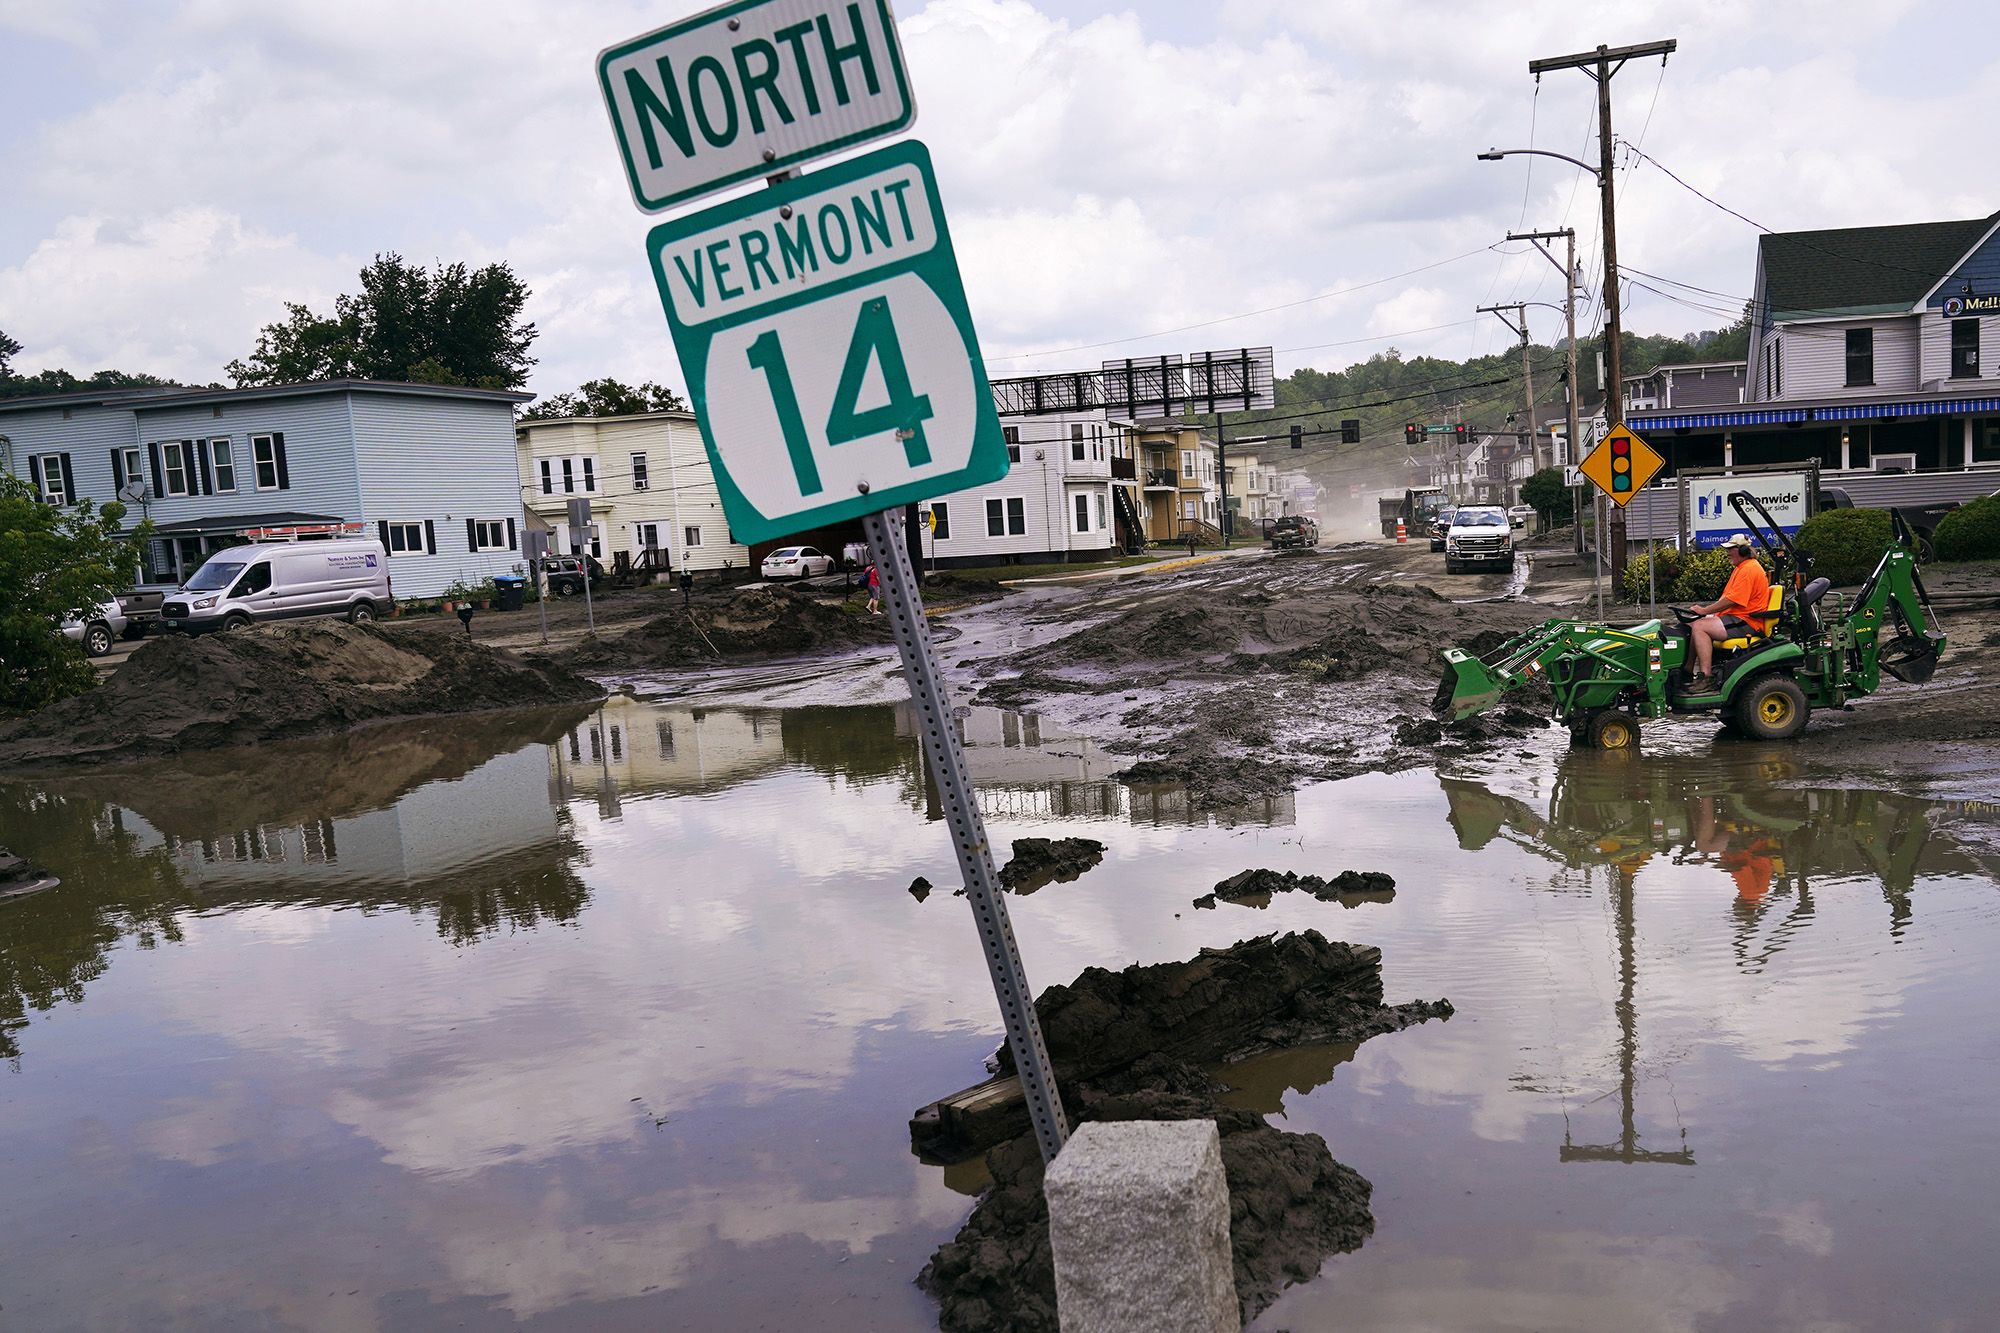 Still reeling from catastrophic flooding that left at least 1 dead, Vermont  braces for another round of rain | CNN